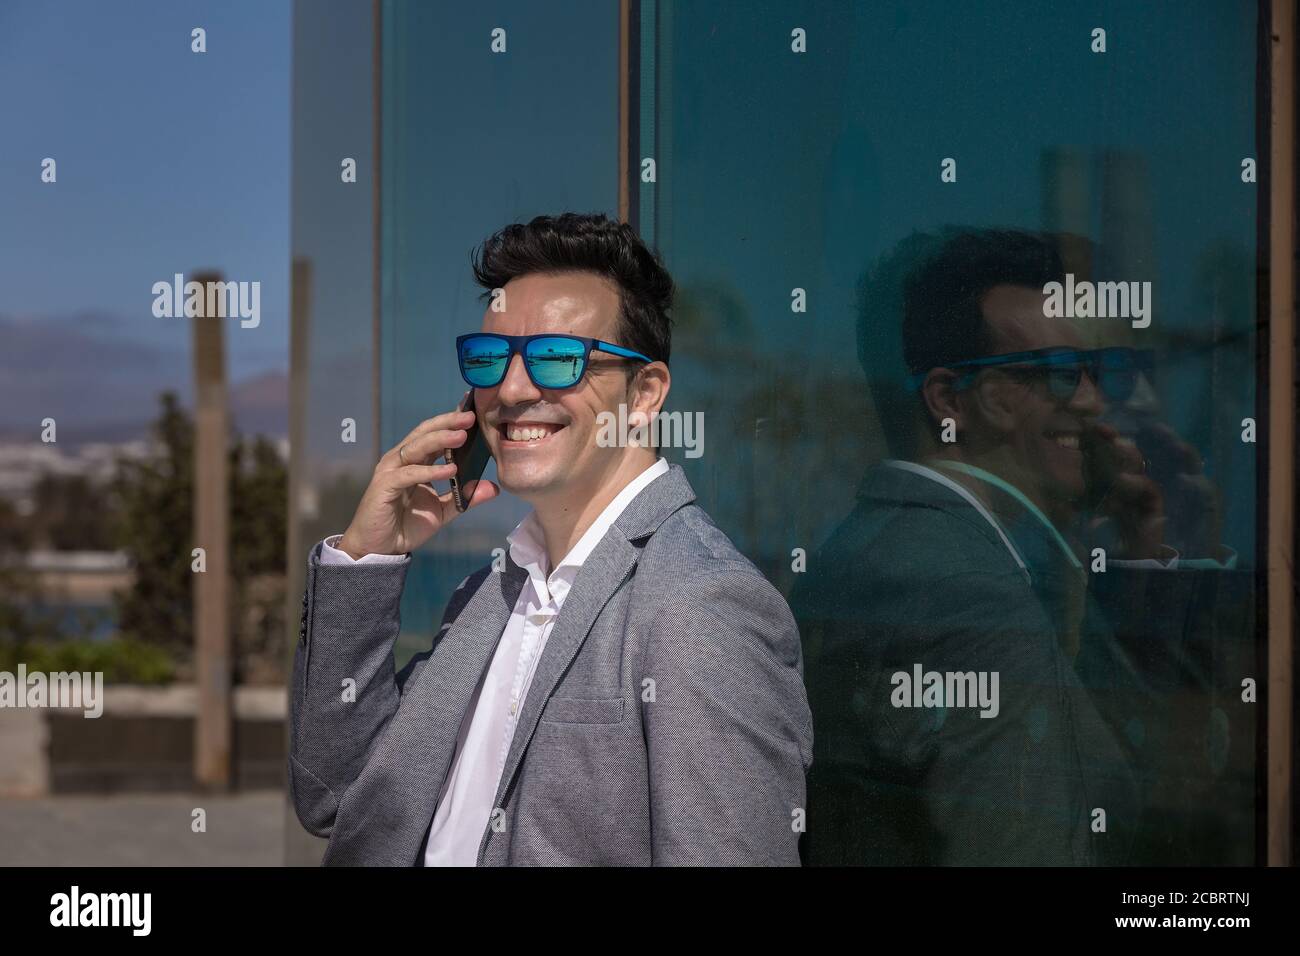 Optimistic adult businessman in sunglasses smiling and talking on smartphone while leaning on glass wall in city Stock Photo